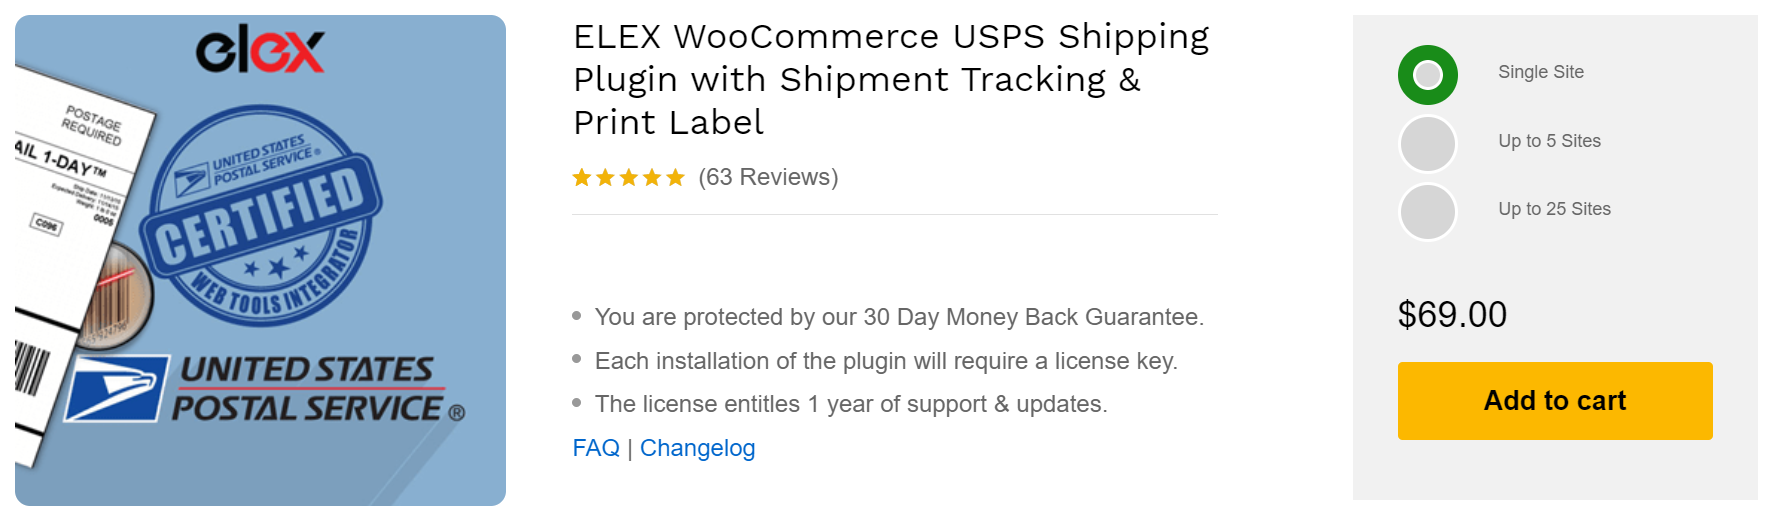 add a Shipping Calculator on WooCommerce checkout page | USPS